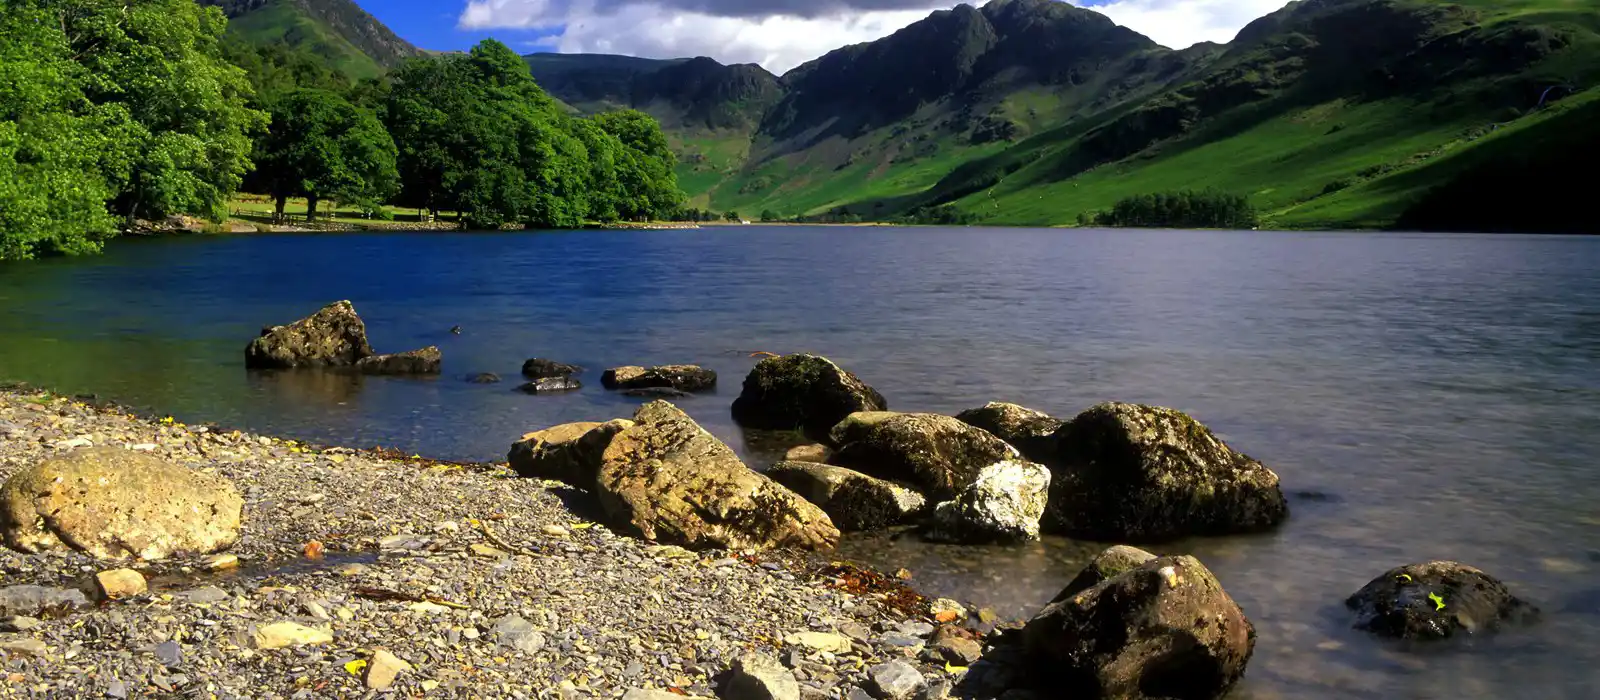 Lake Buttermere, a fantastic place to walk in the Lake District